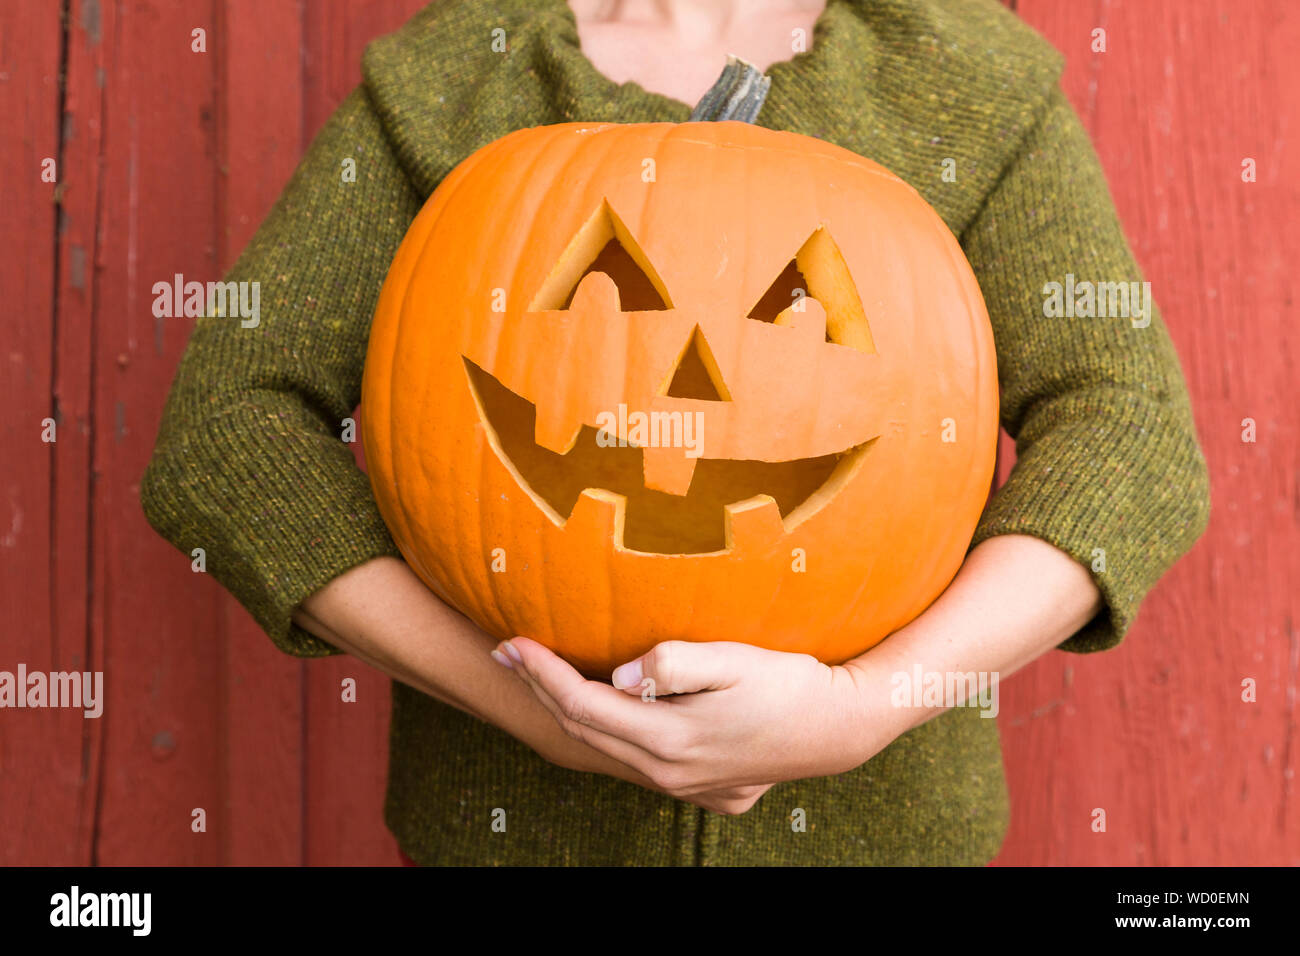 Close-up of young woman holding a pumpkin jack-o'-lantern outdoors in the fall with a red barn in the background Stock Photo